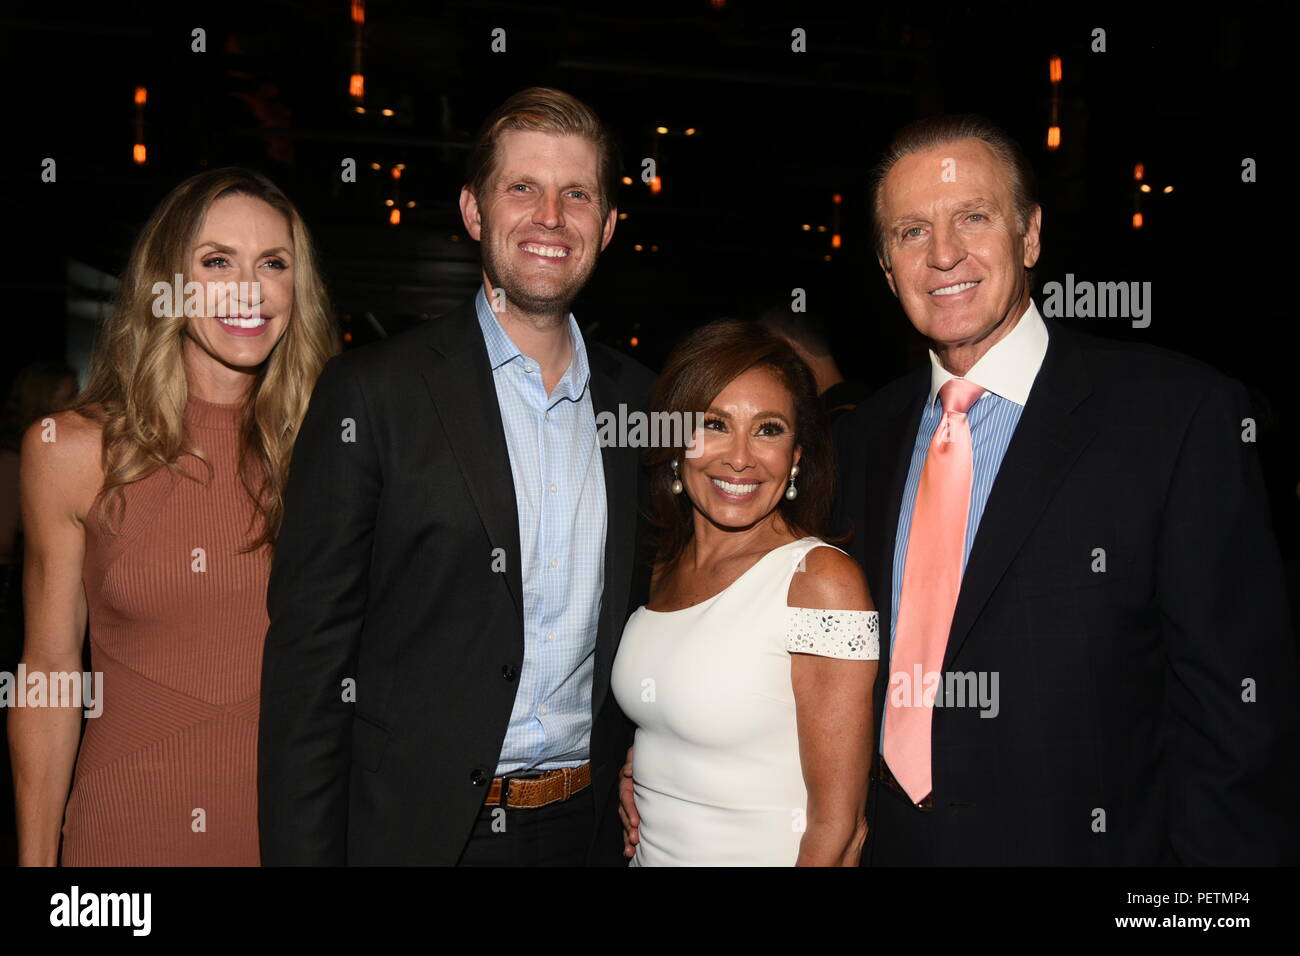 Eric Trump and wife Lara attend Judge Jeannine Pirro's book signing in NYC  Featuring: Lara Trump, Eric Trump, Judge Jeanine Pirro.  Anthony Where: Manhattan, New York, United States When: 16 Jul 2018 Credit: Rob Rich/WENN.com Stock Photo